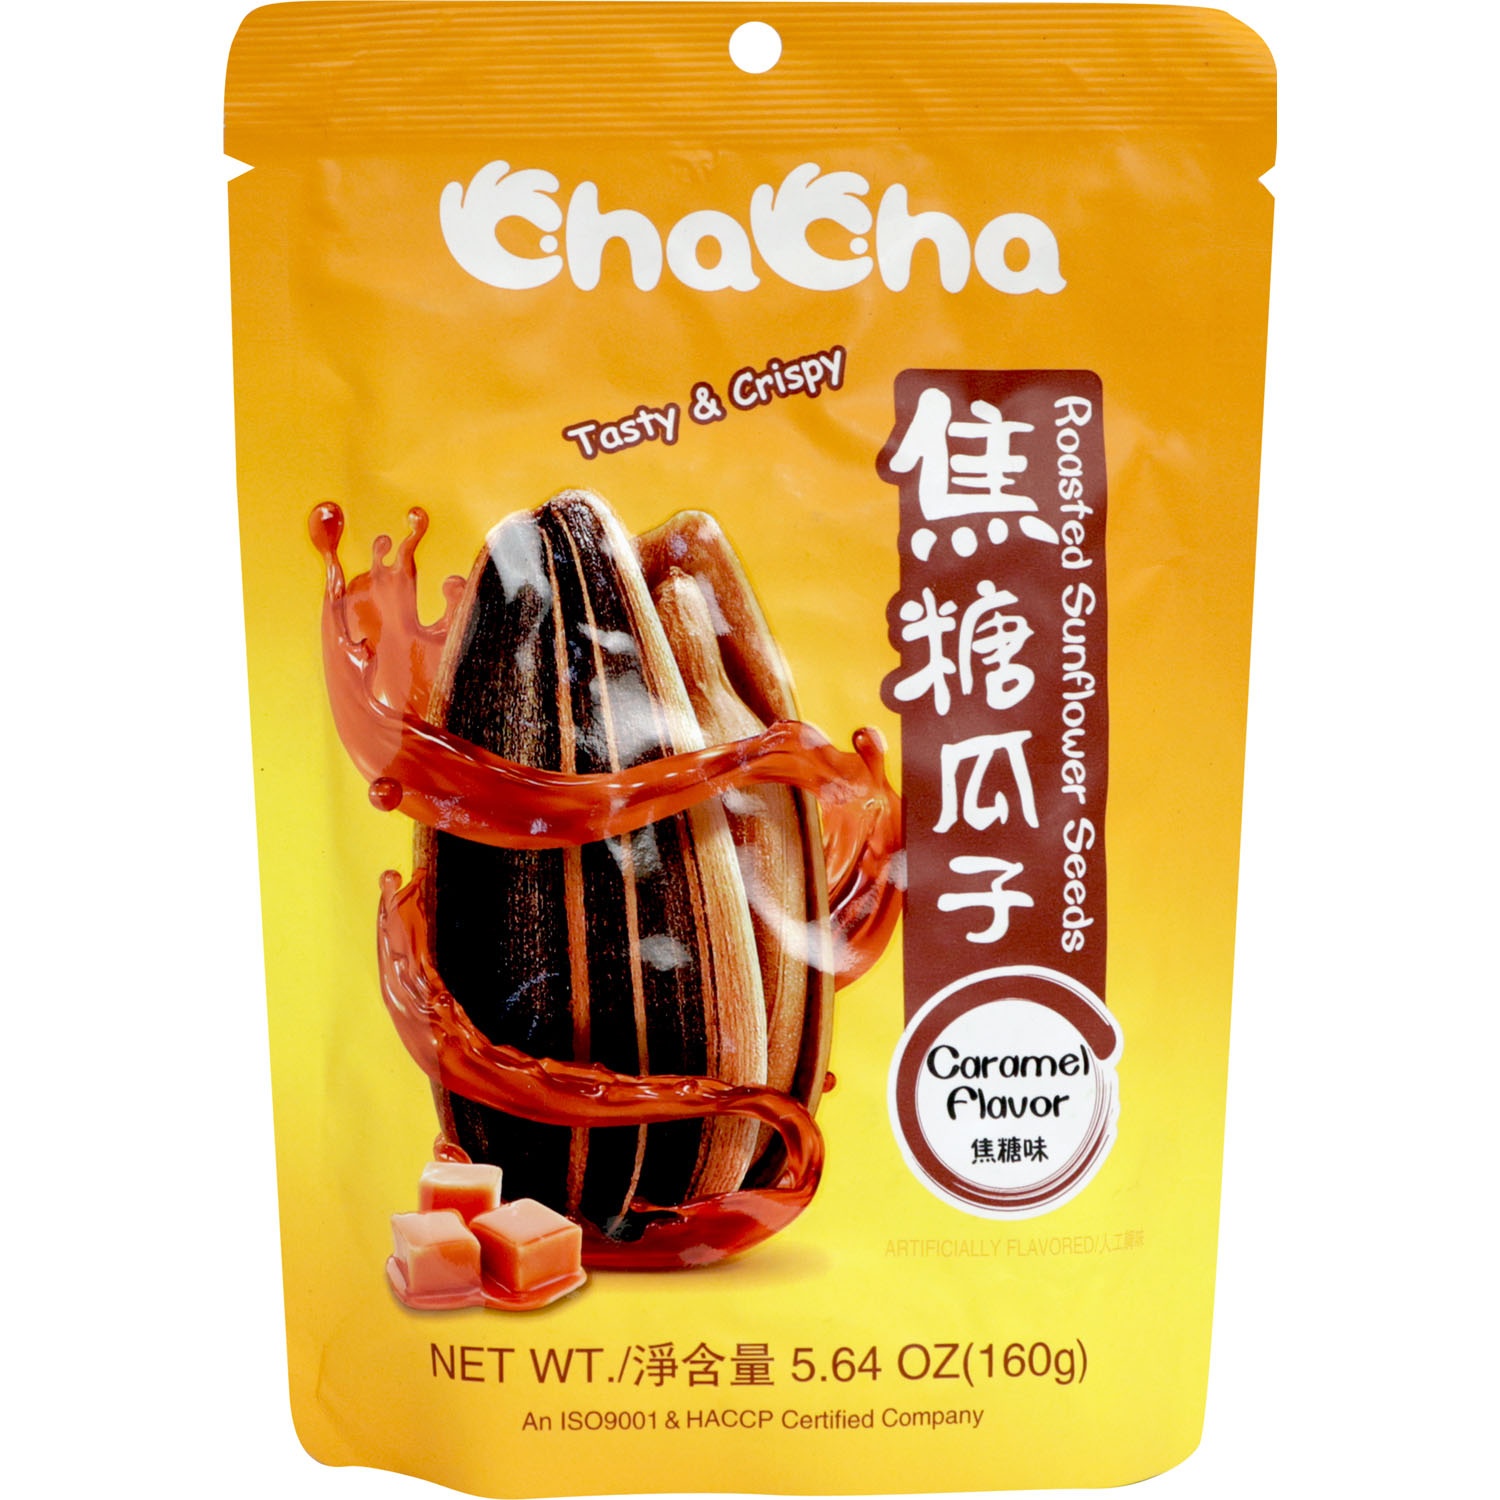 slide 1 of 1, ChaCha Sunflower Seed- Caramel Flavor, 1 ct